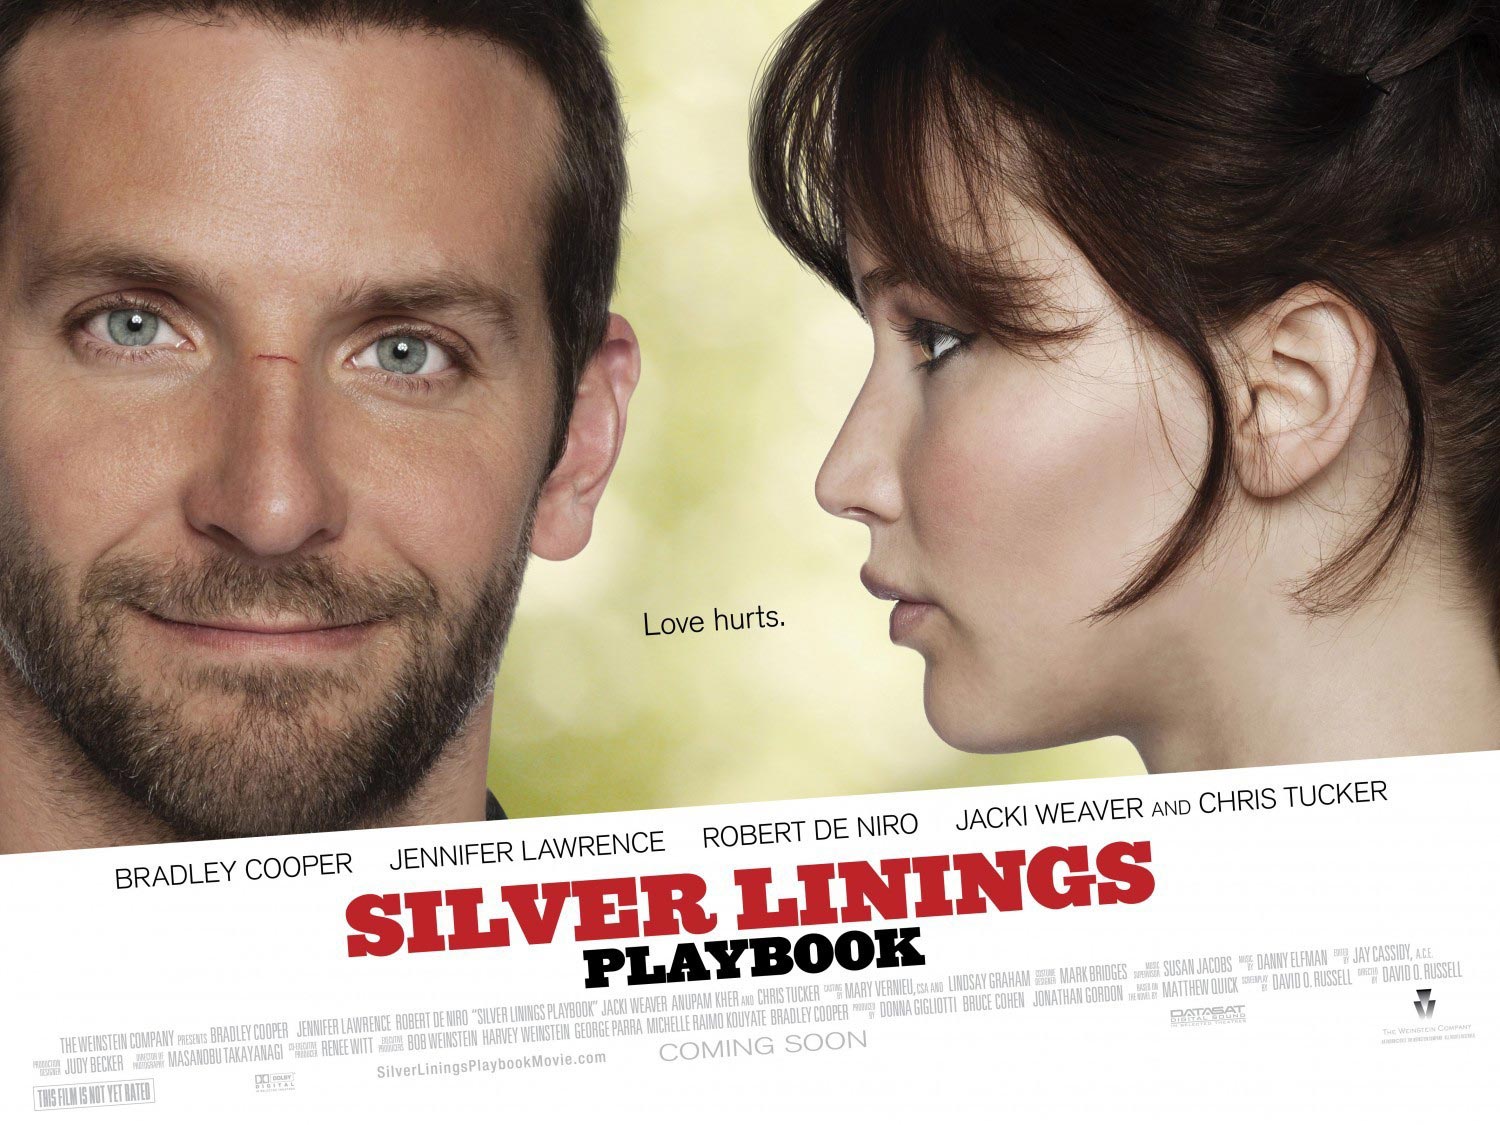 Silver Linings Playbook Backgrounds, Compatible - PC, Mobile, Gadgets| 1500x1125 px